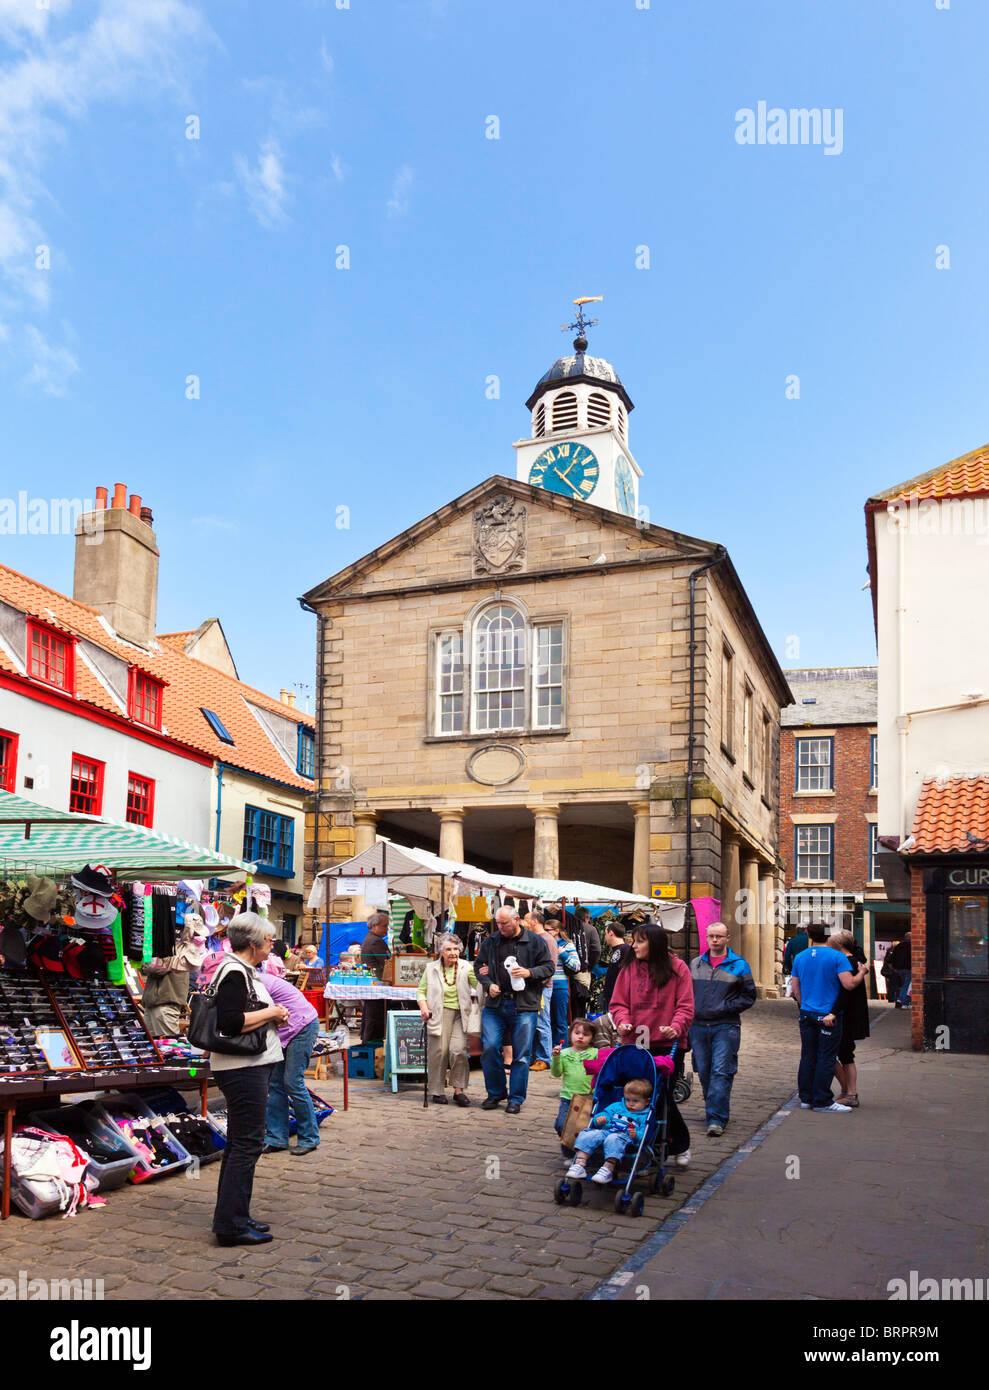 Street market stalls in the old town square Whitby, North Yorkshire, England, UK Stock Photo